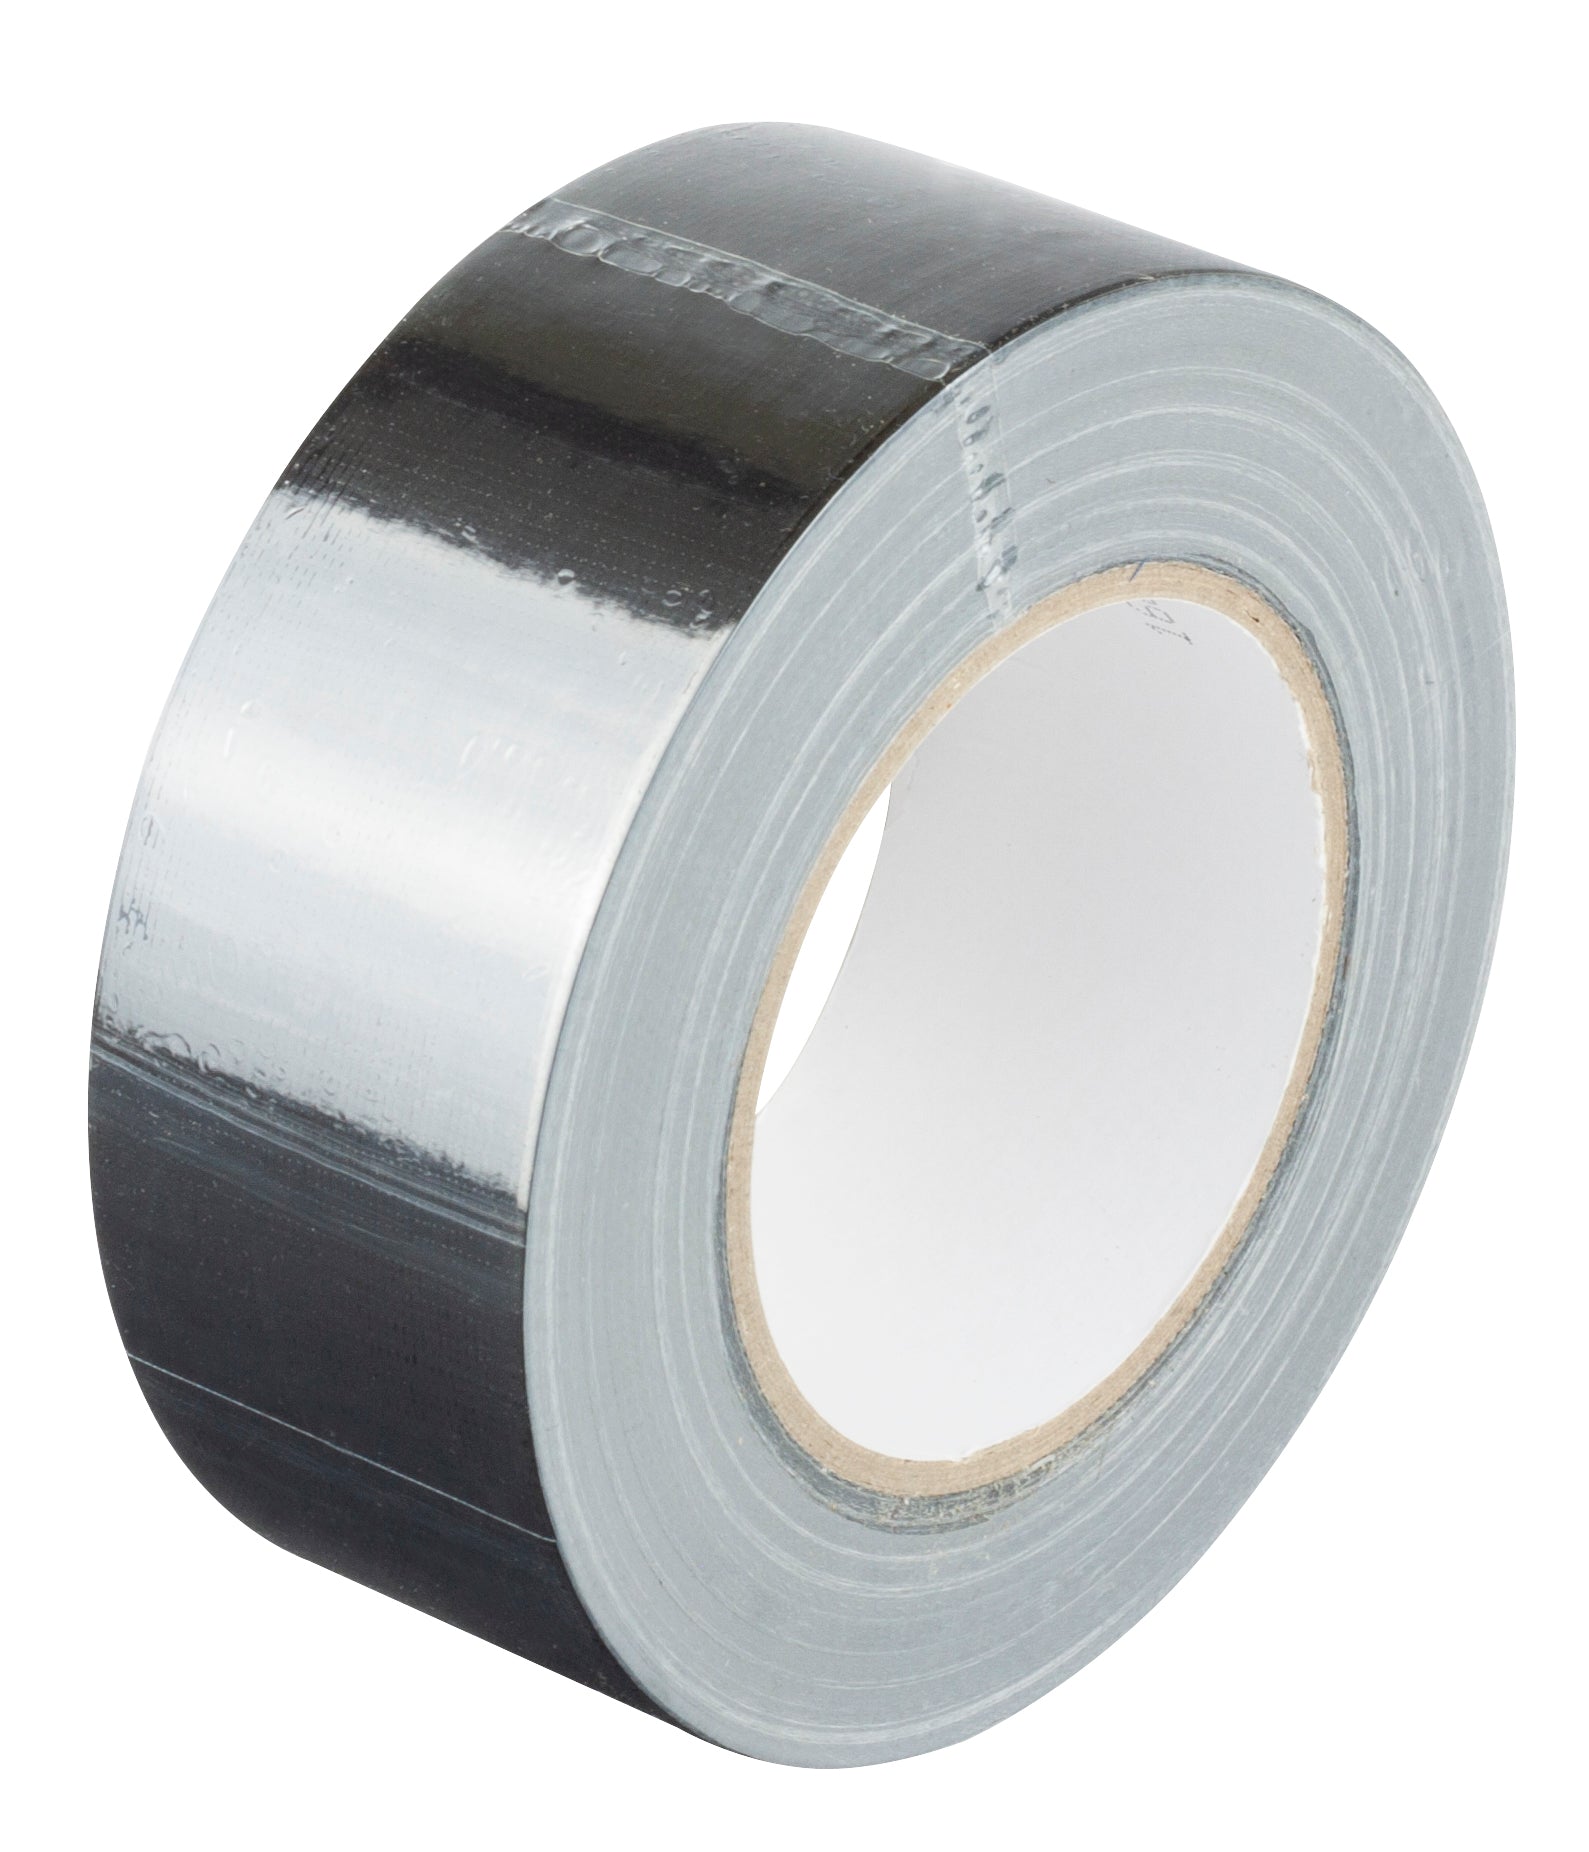 Gaffer/Duct Tape 100mm x 50m (SILVER) 50 Mesh 0.18mm Thickness  - Per Pack